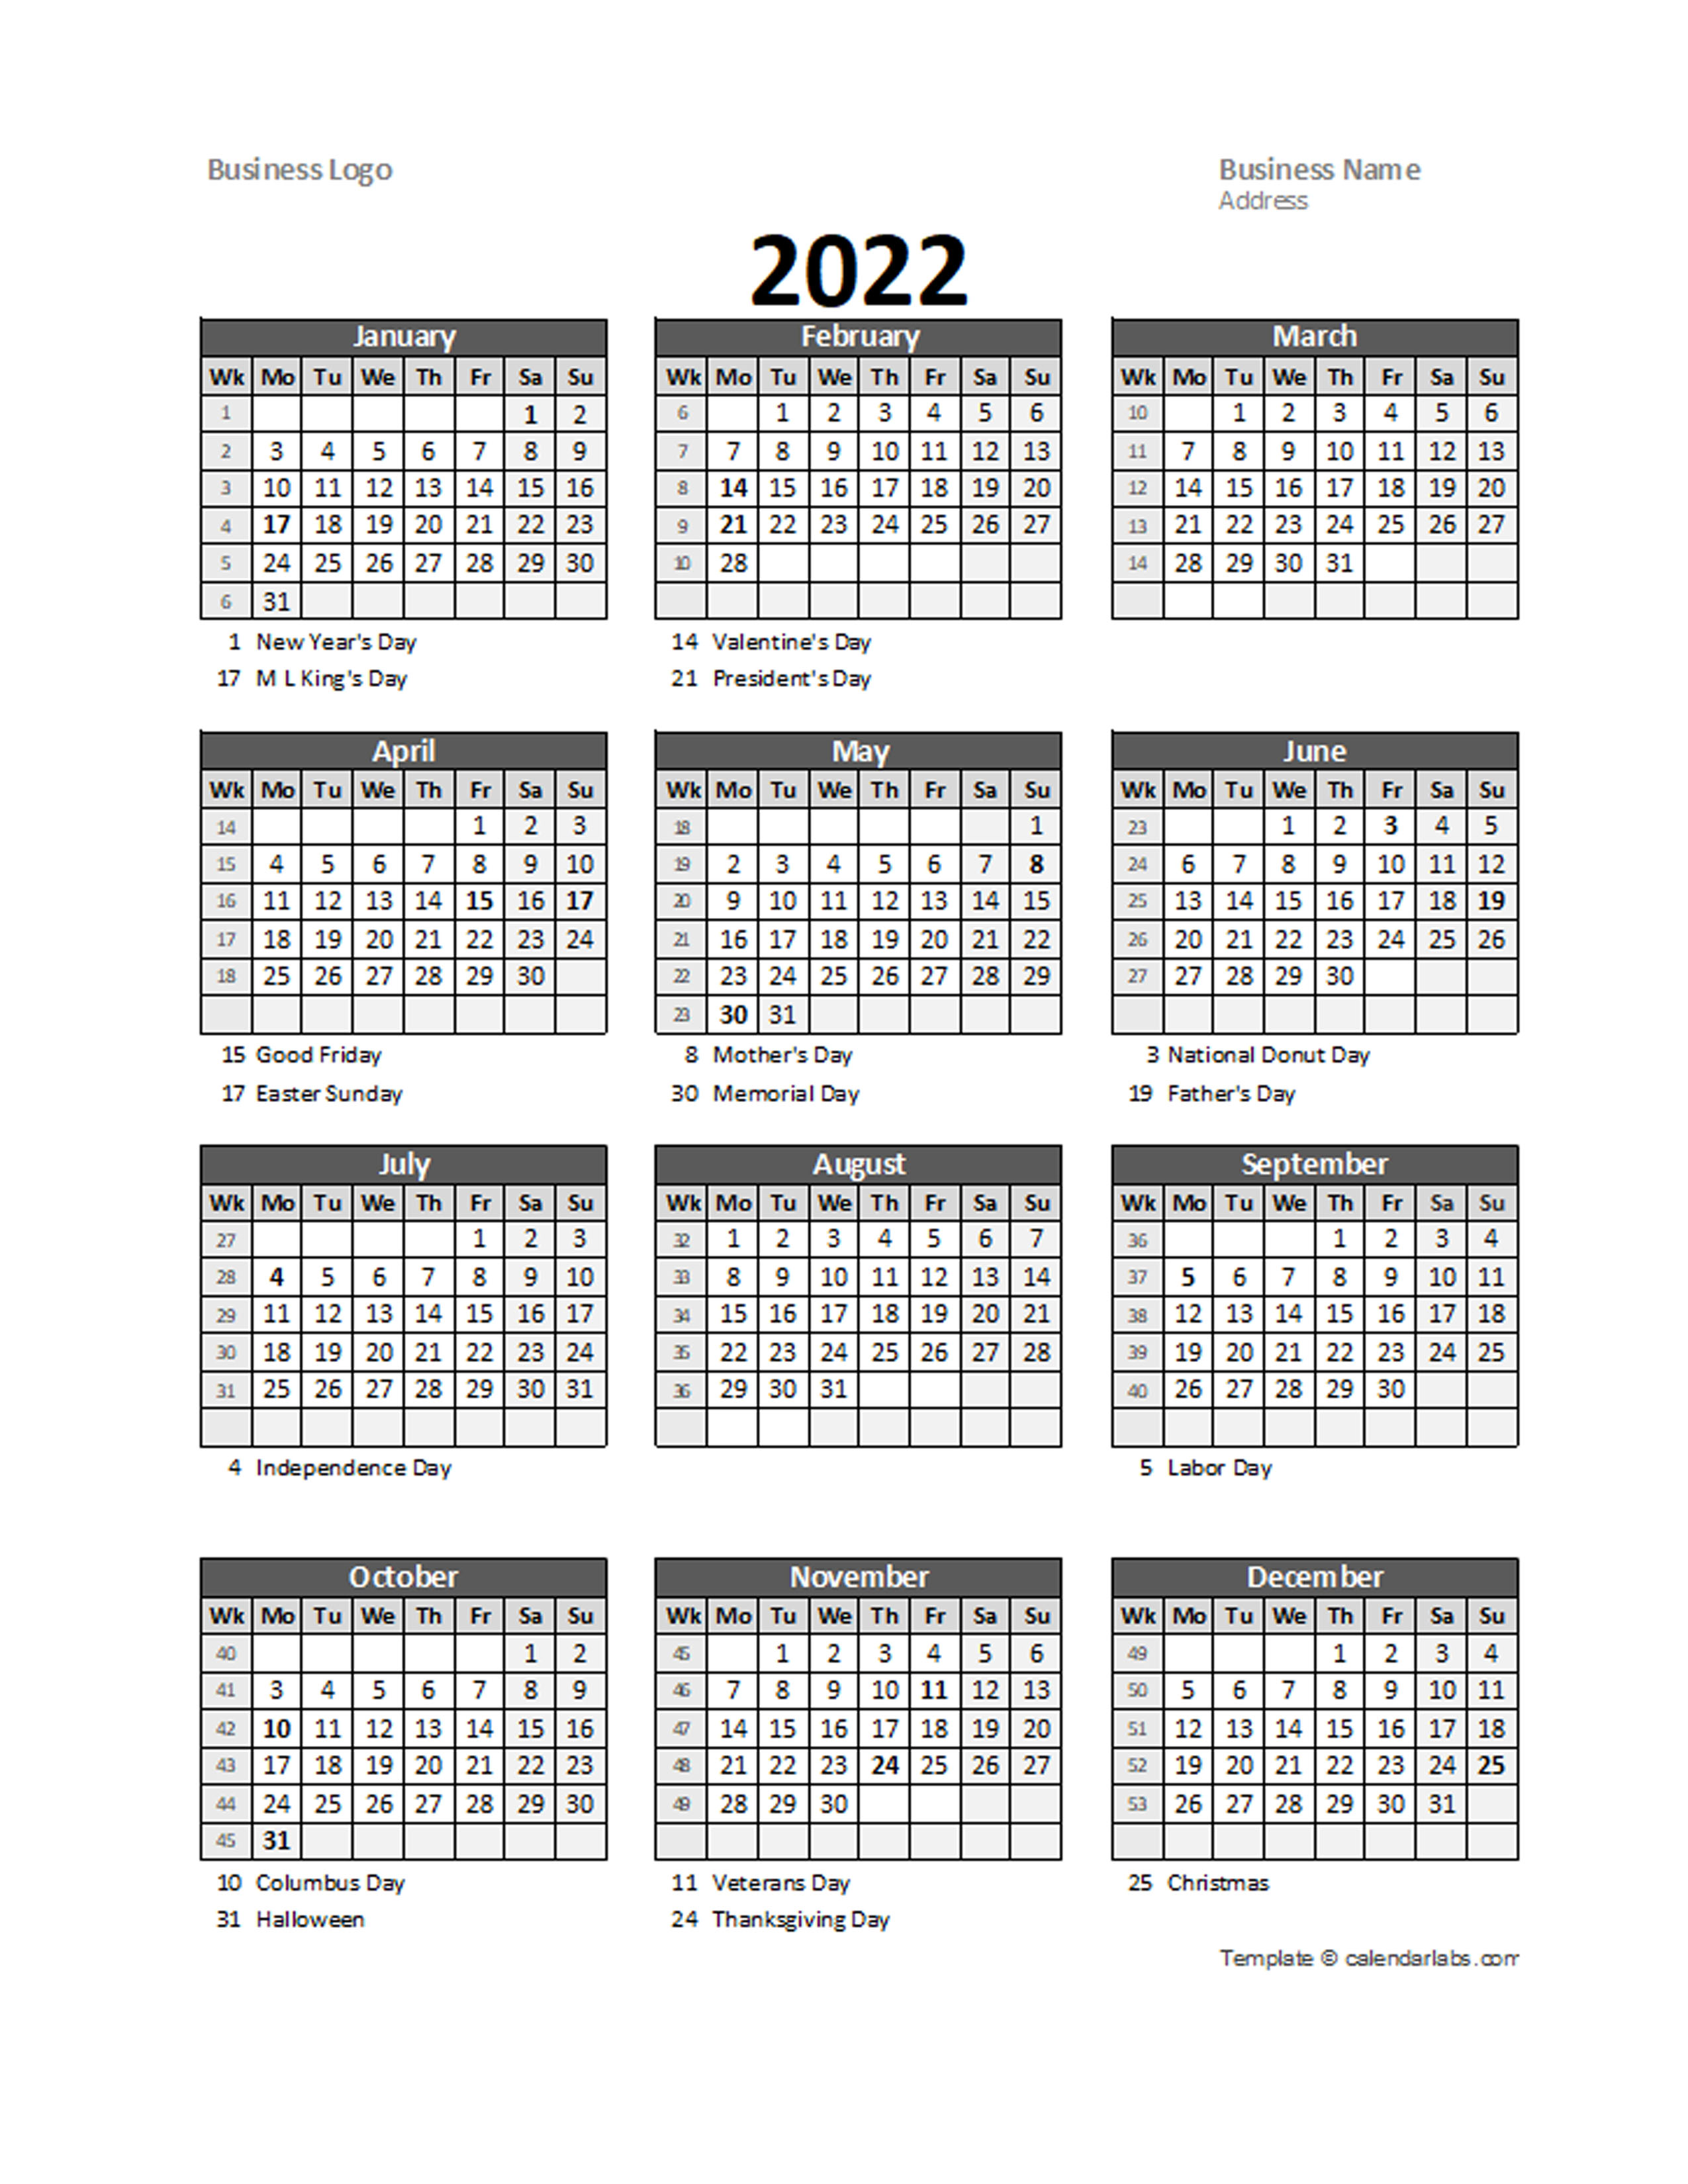 2022 yearly business calendar with week number free printable templates